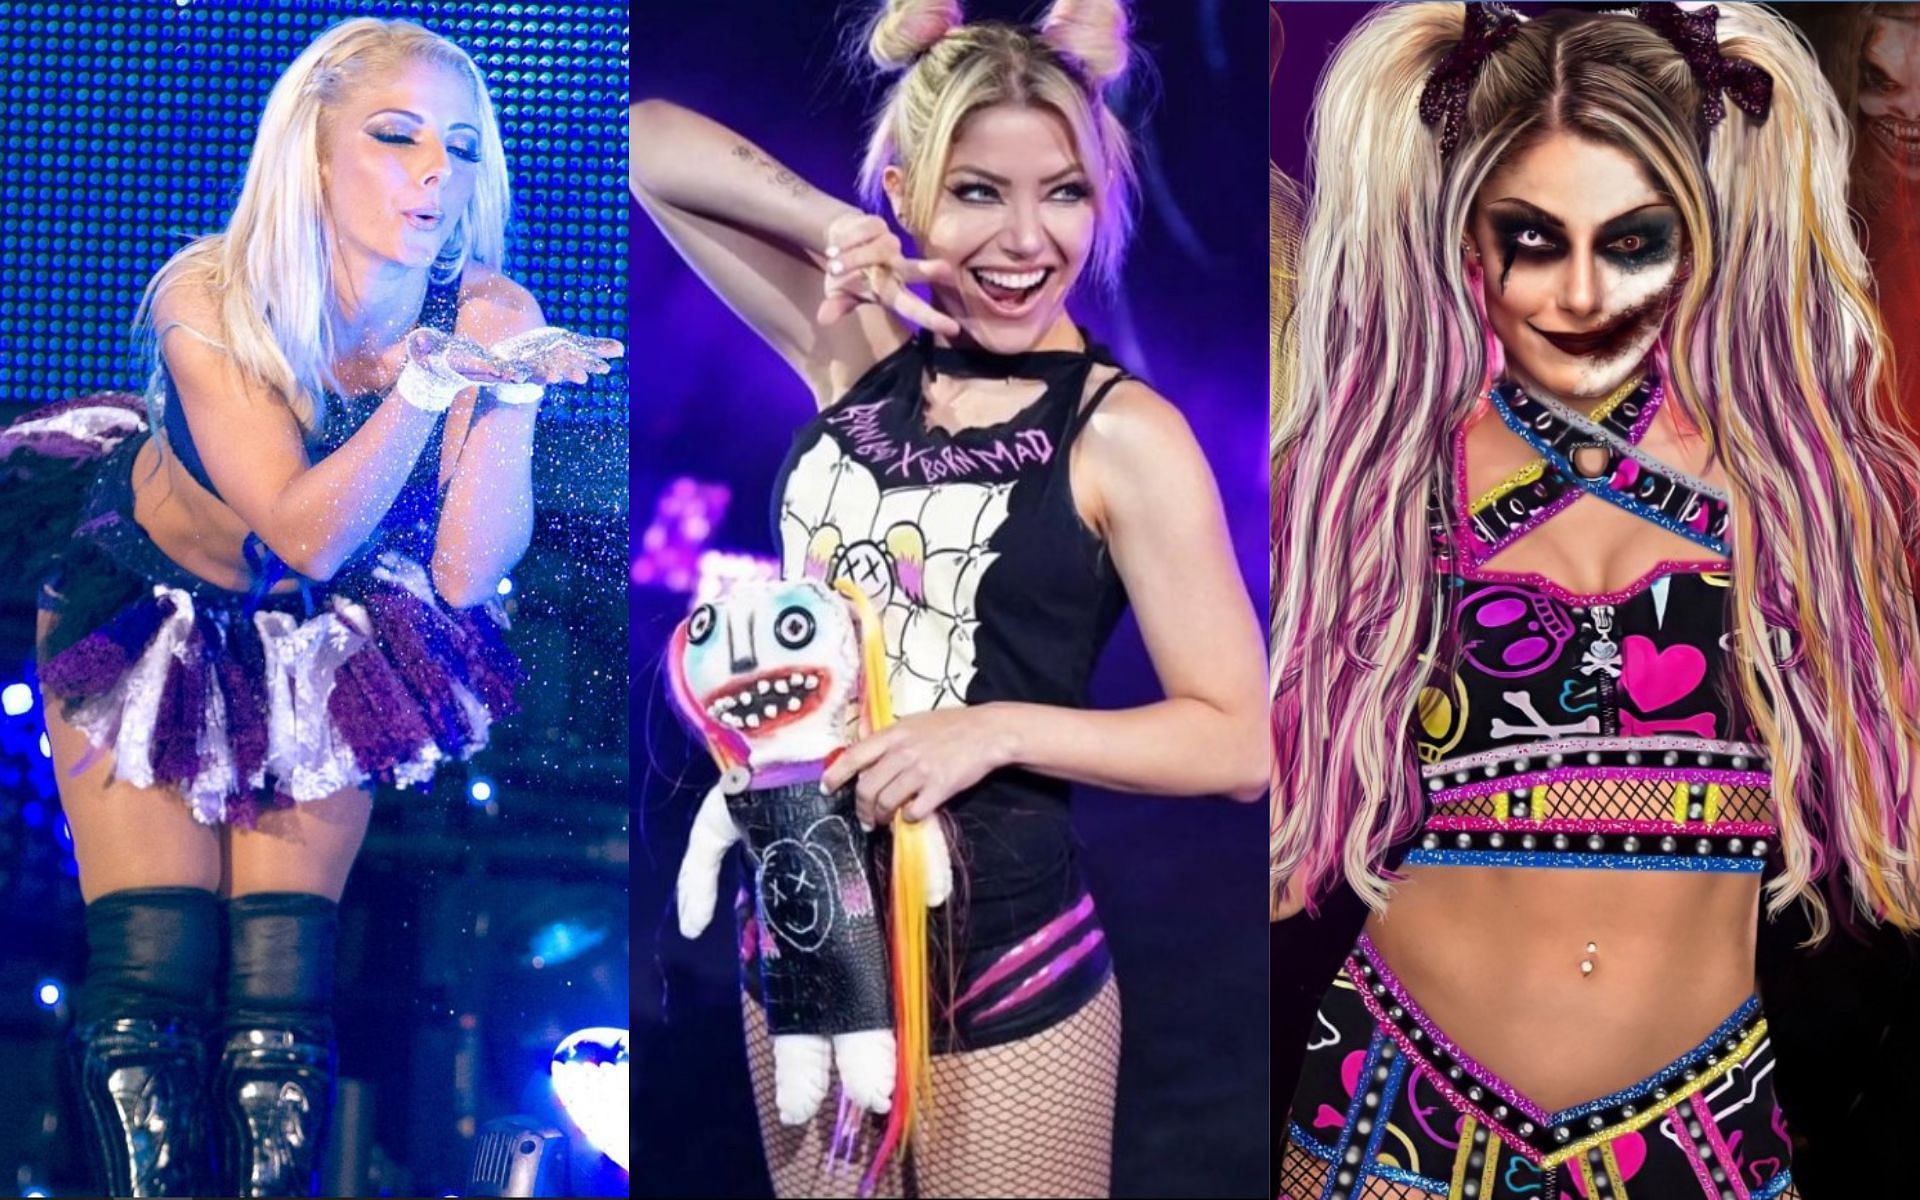 Little Miss Bliss needs a new persona